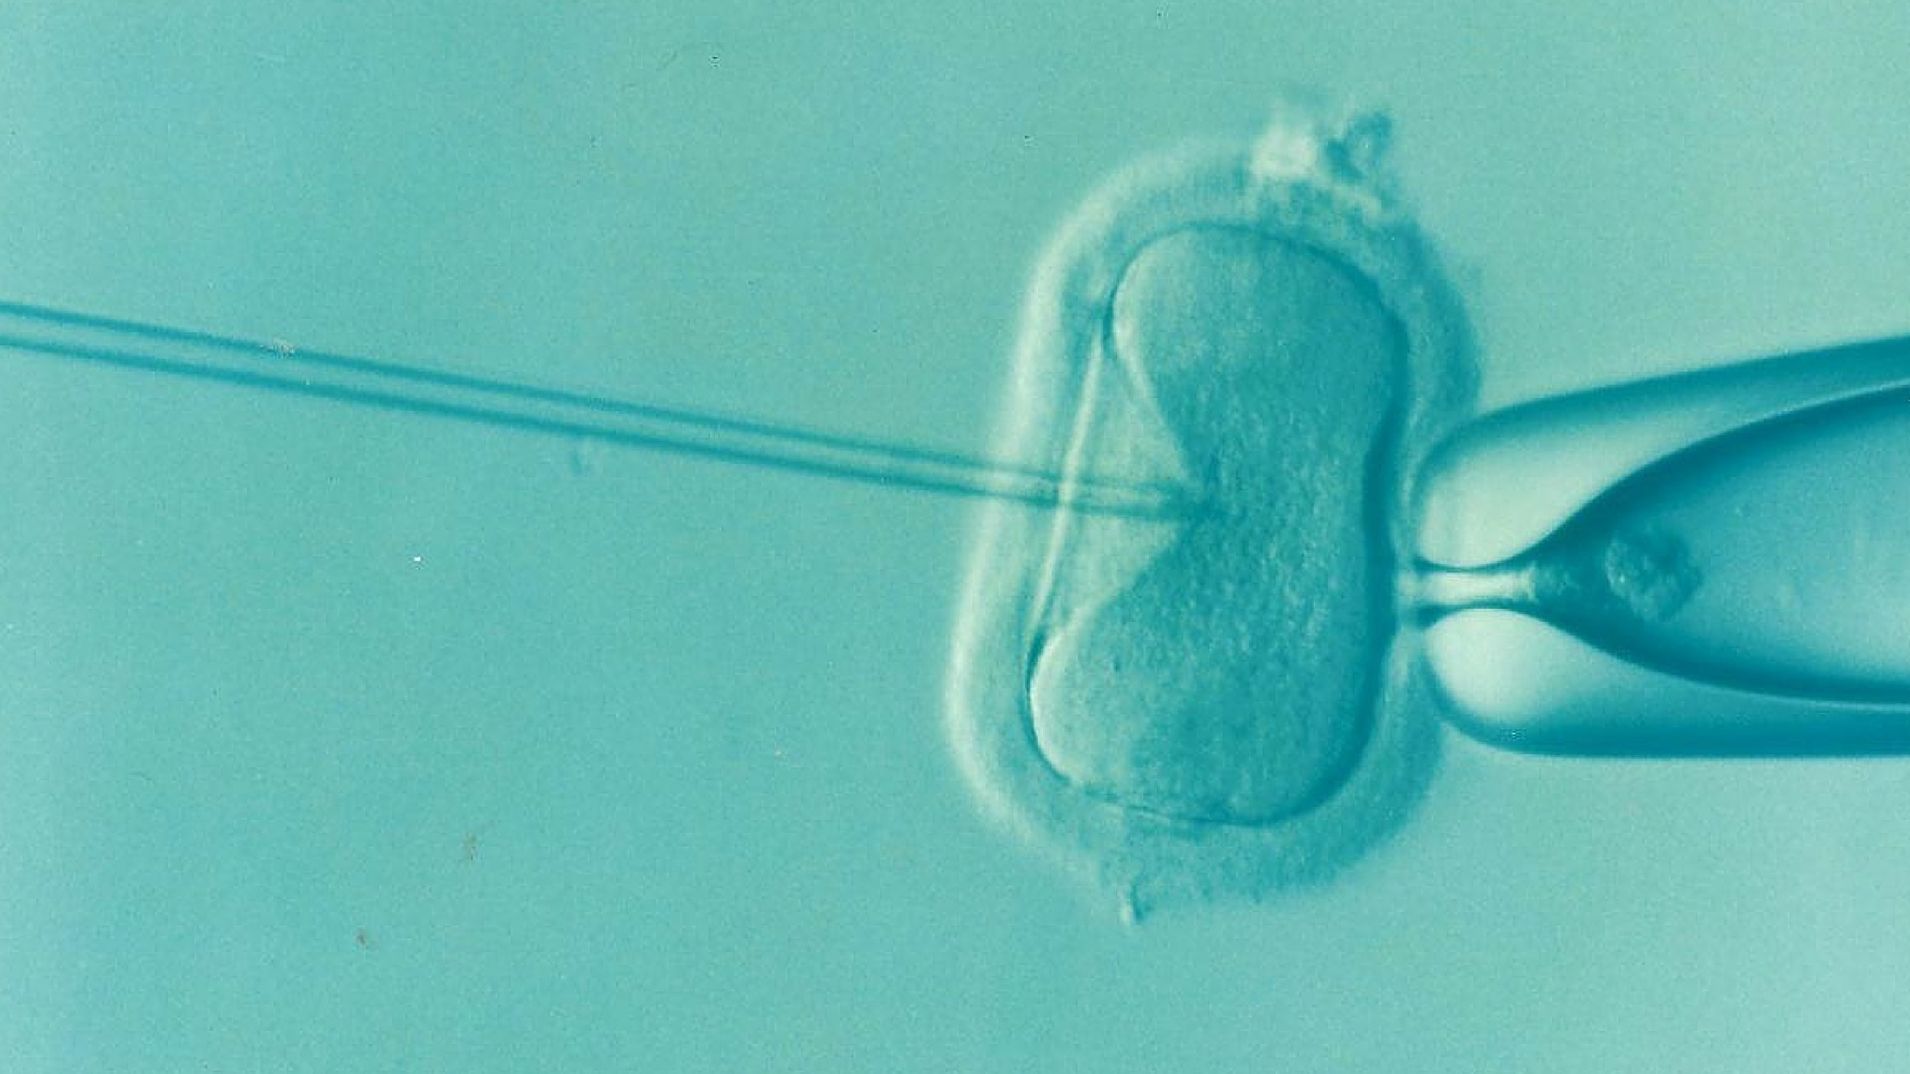 Detect a future schizophrenia in an embryo?  The ethical limits of pre-pregnancy genetic testing